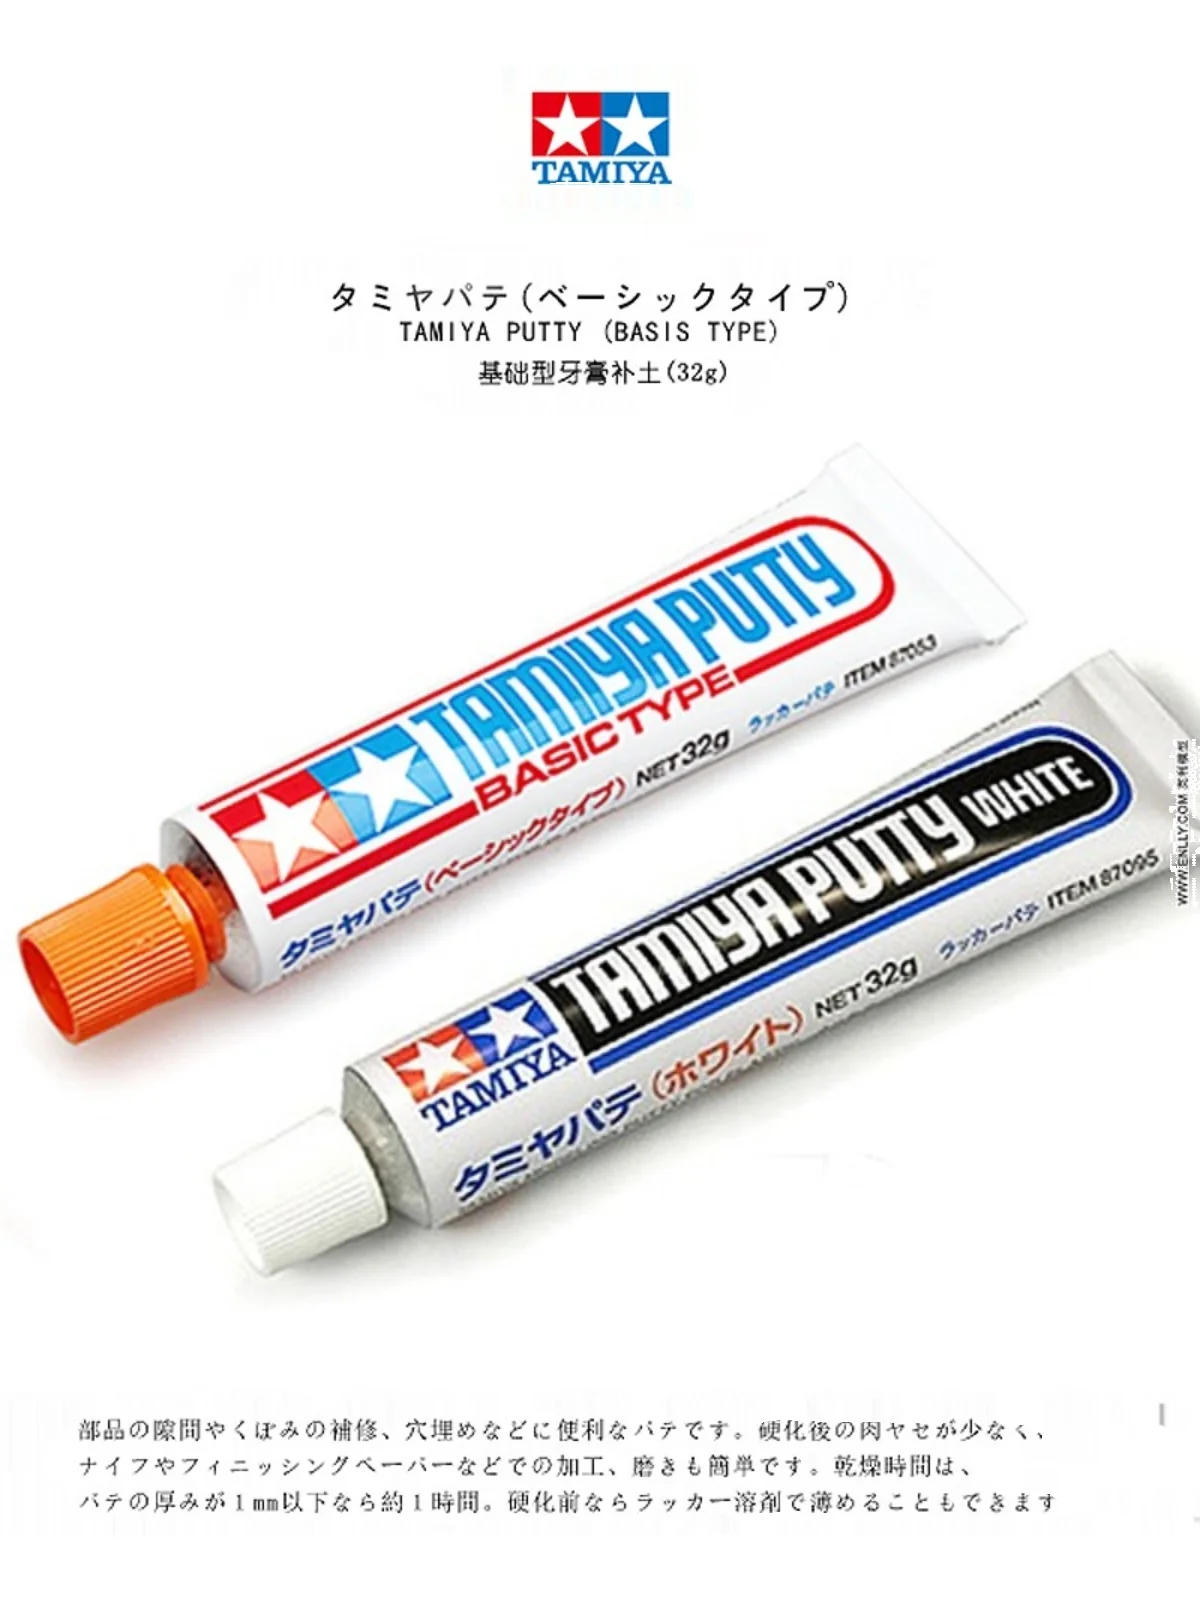 

Tamiya 87053/87095 Modeling tool Toothpaste putty white and gray 32g 11